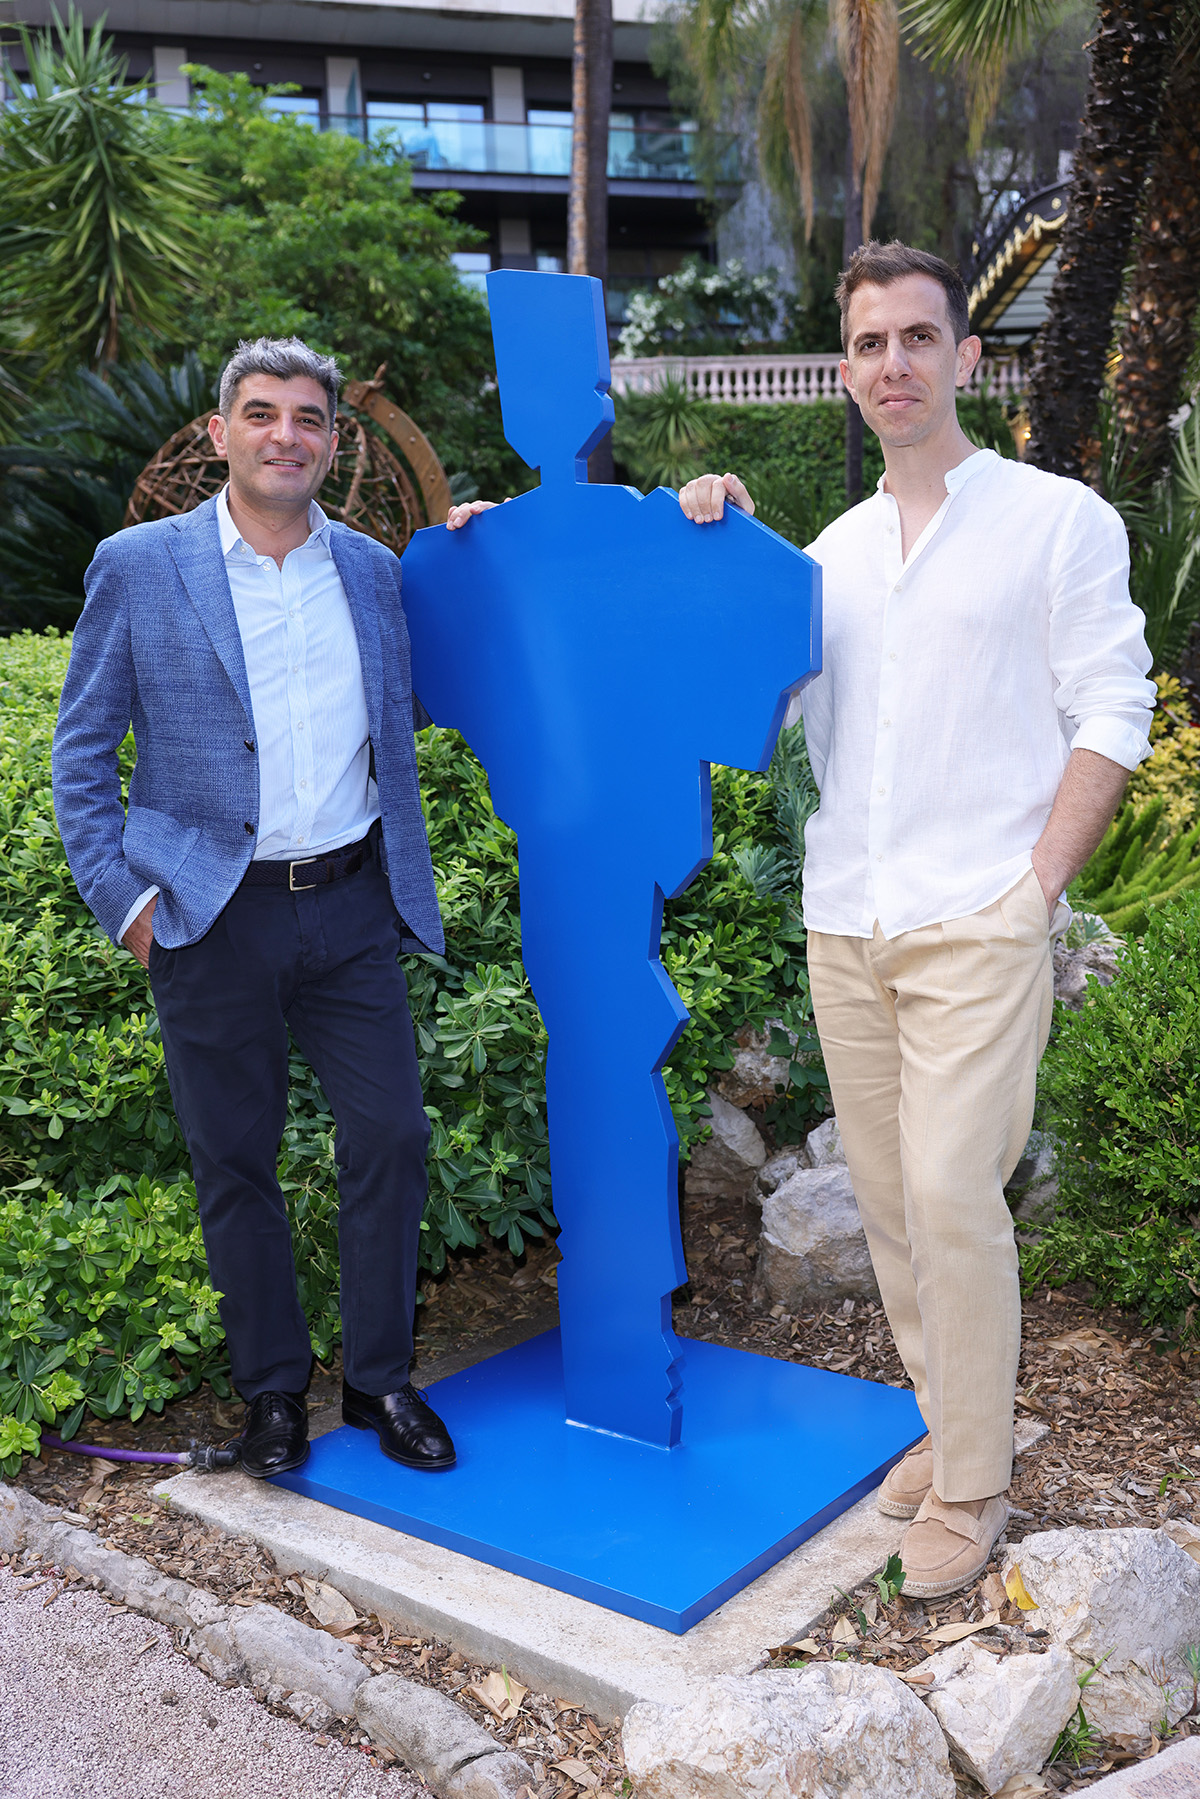 Two men standing next to a blue statue of a person